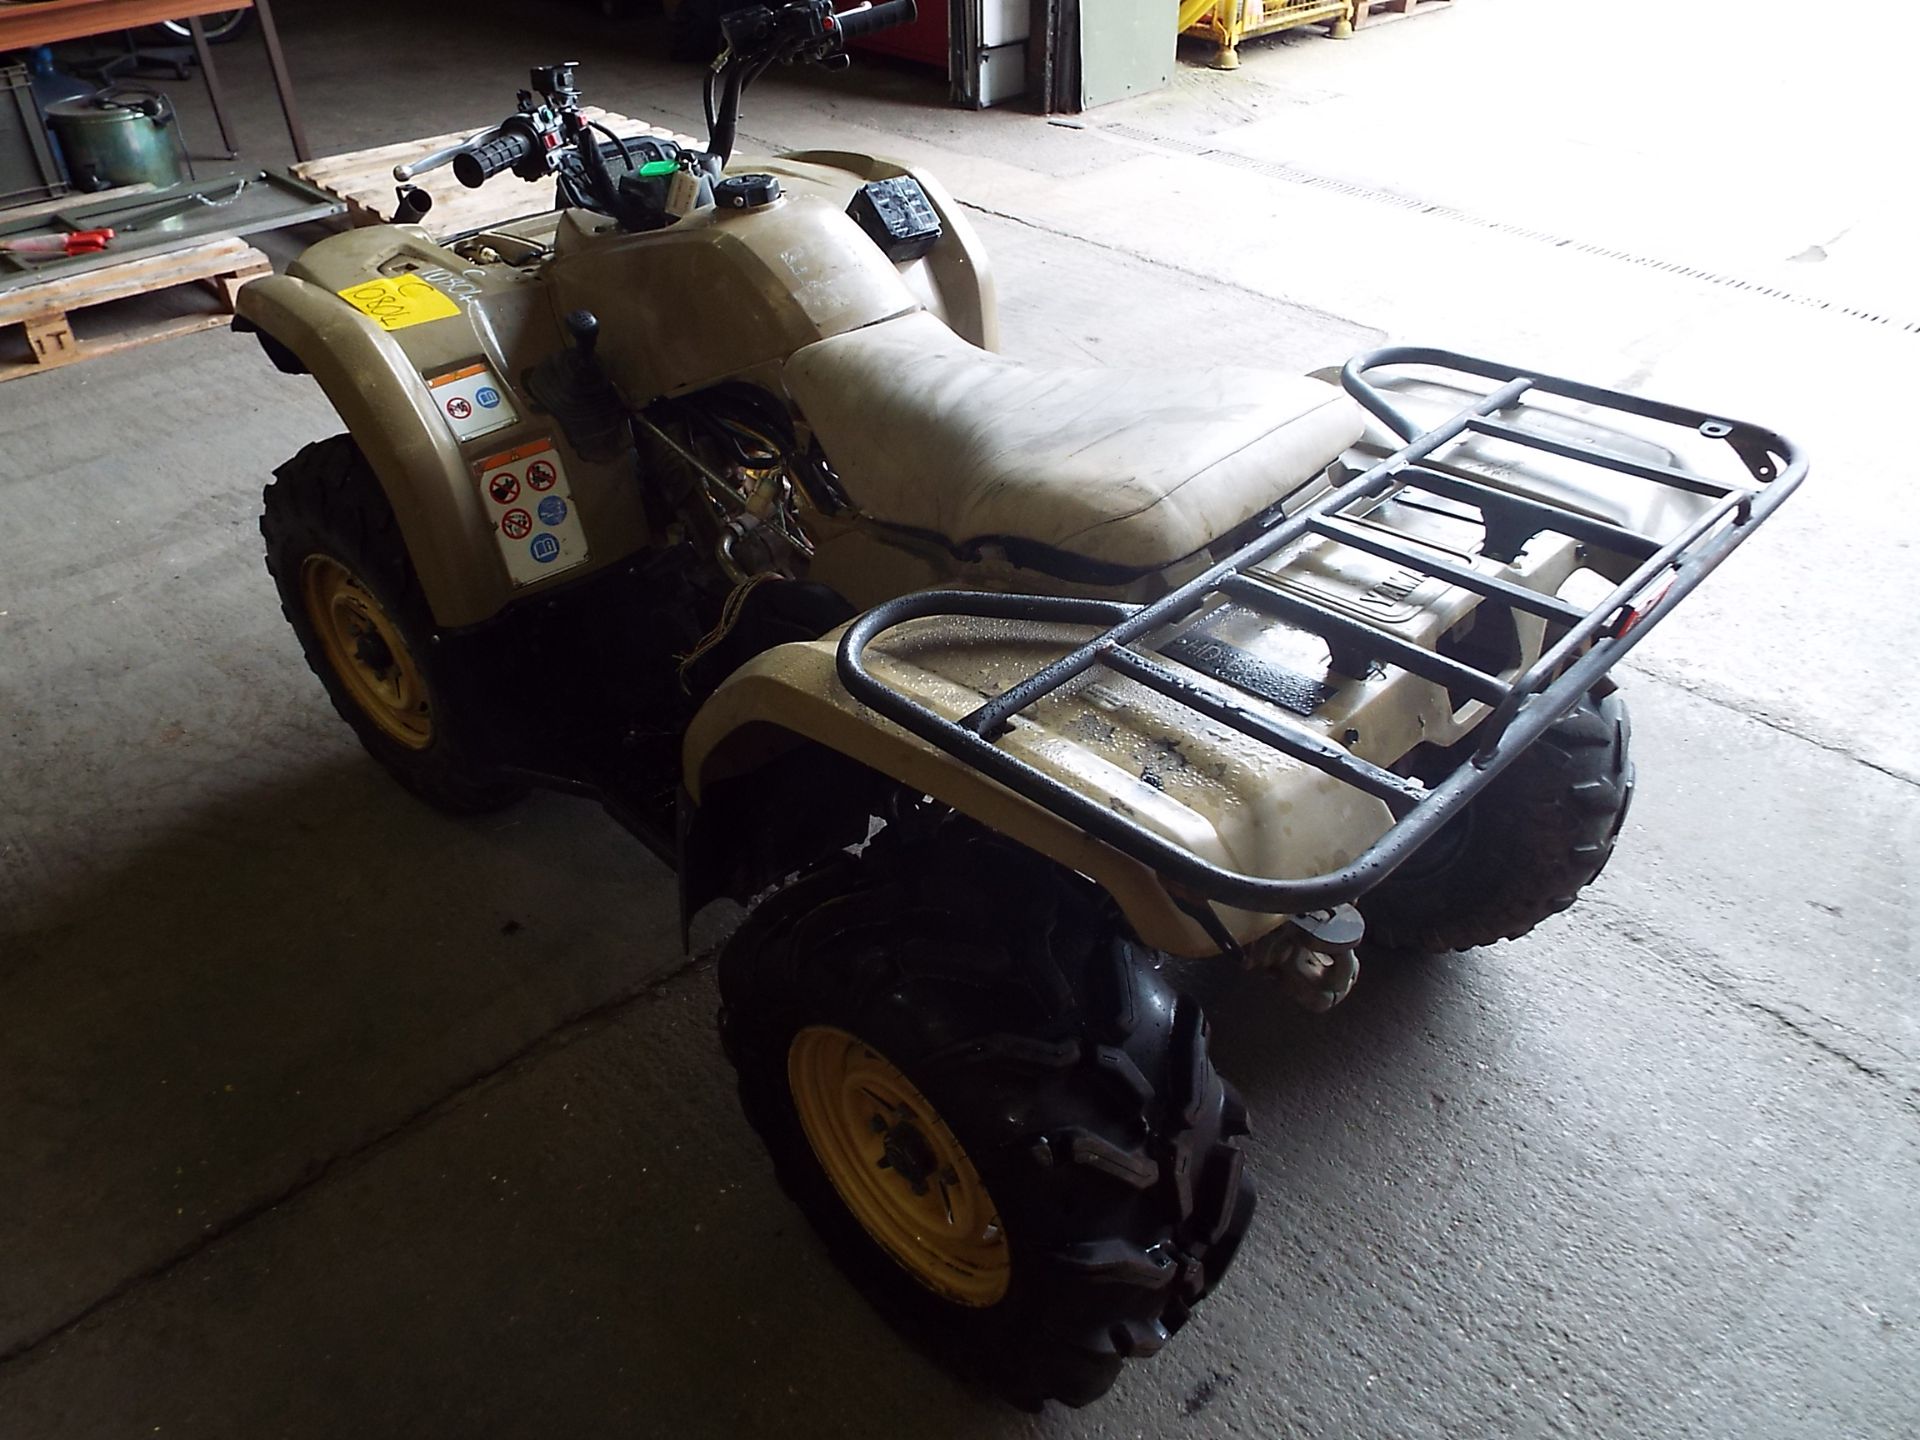 Military Specification Yamaha Grizzly 450 4 x 4 ATV Quad Bike - Image 11 of 19